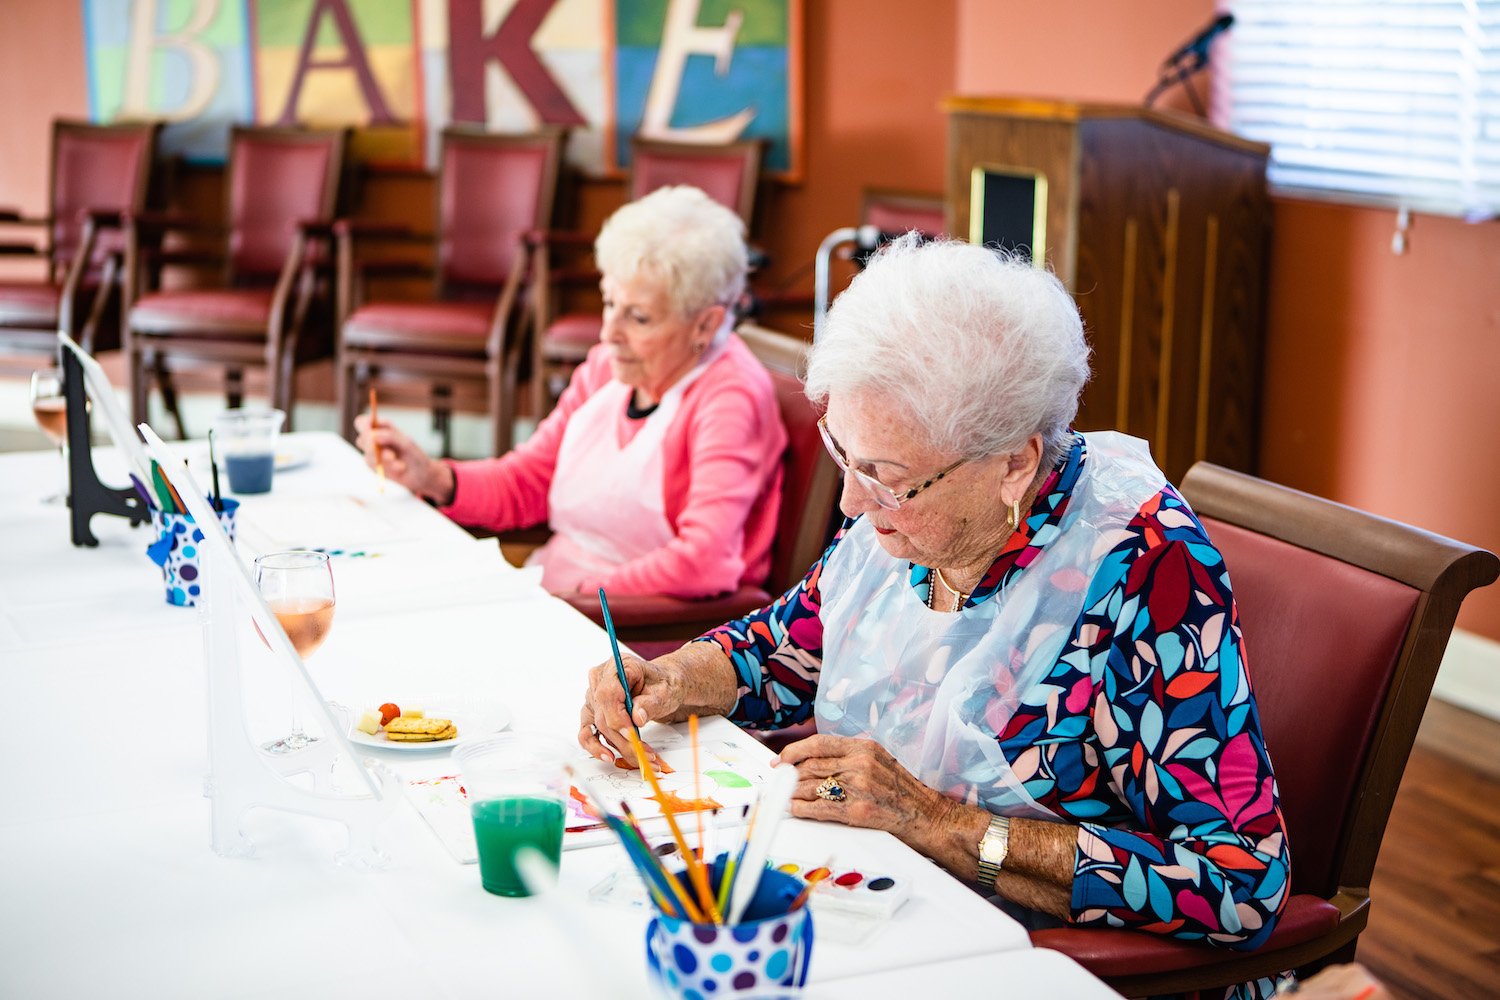 Residents enjoying a painting class together